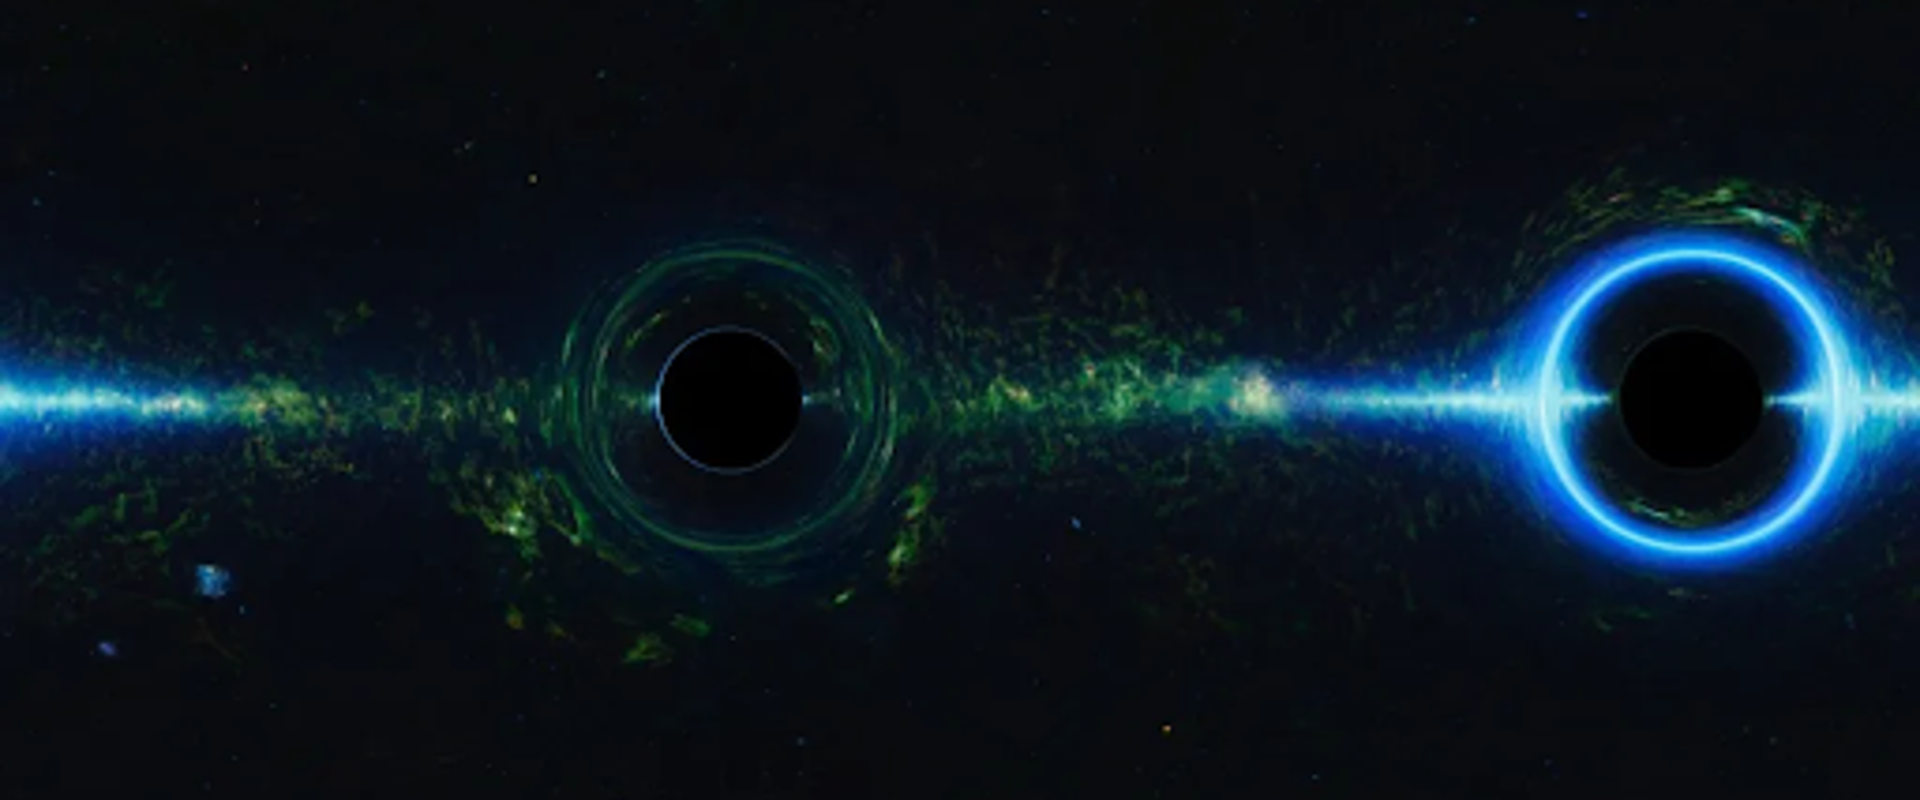 image showing the distortion of the starry background caused by black holes. Dark silhouettes are against a backdrop of stars. An outline called a photon ring is visible around the black holes.